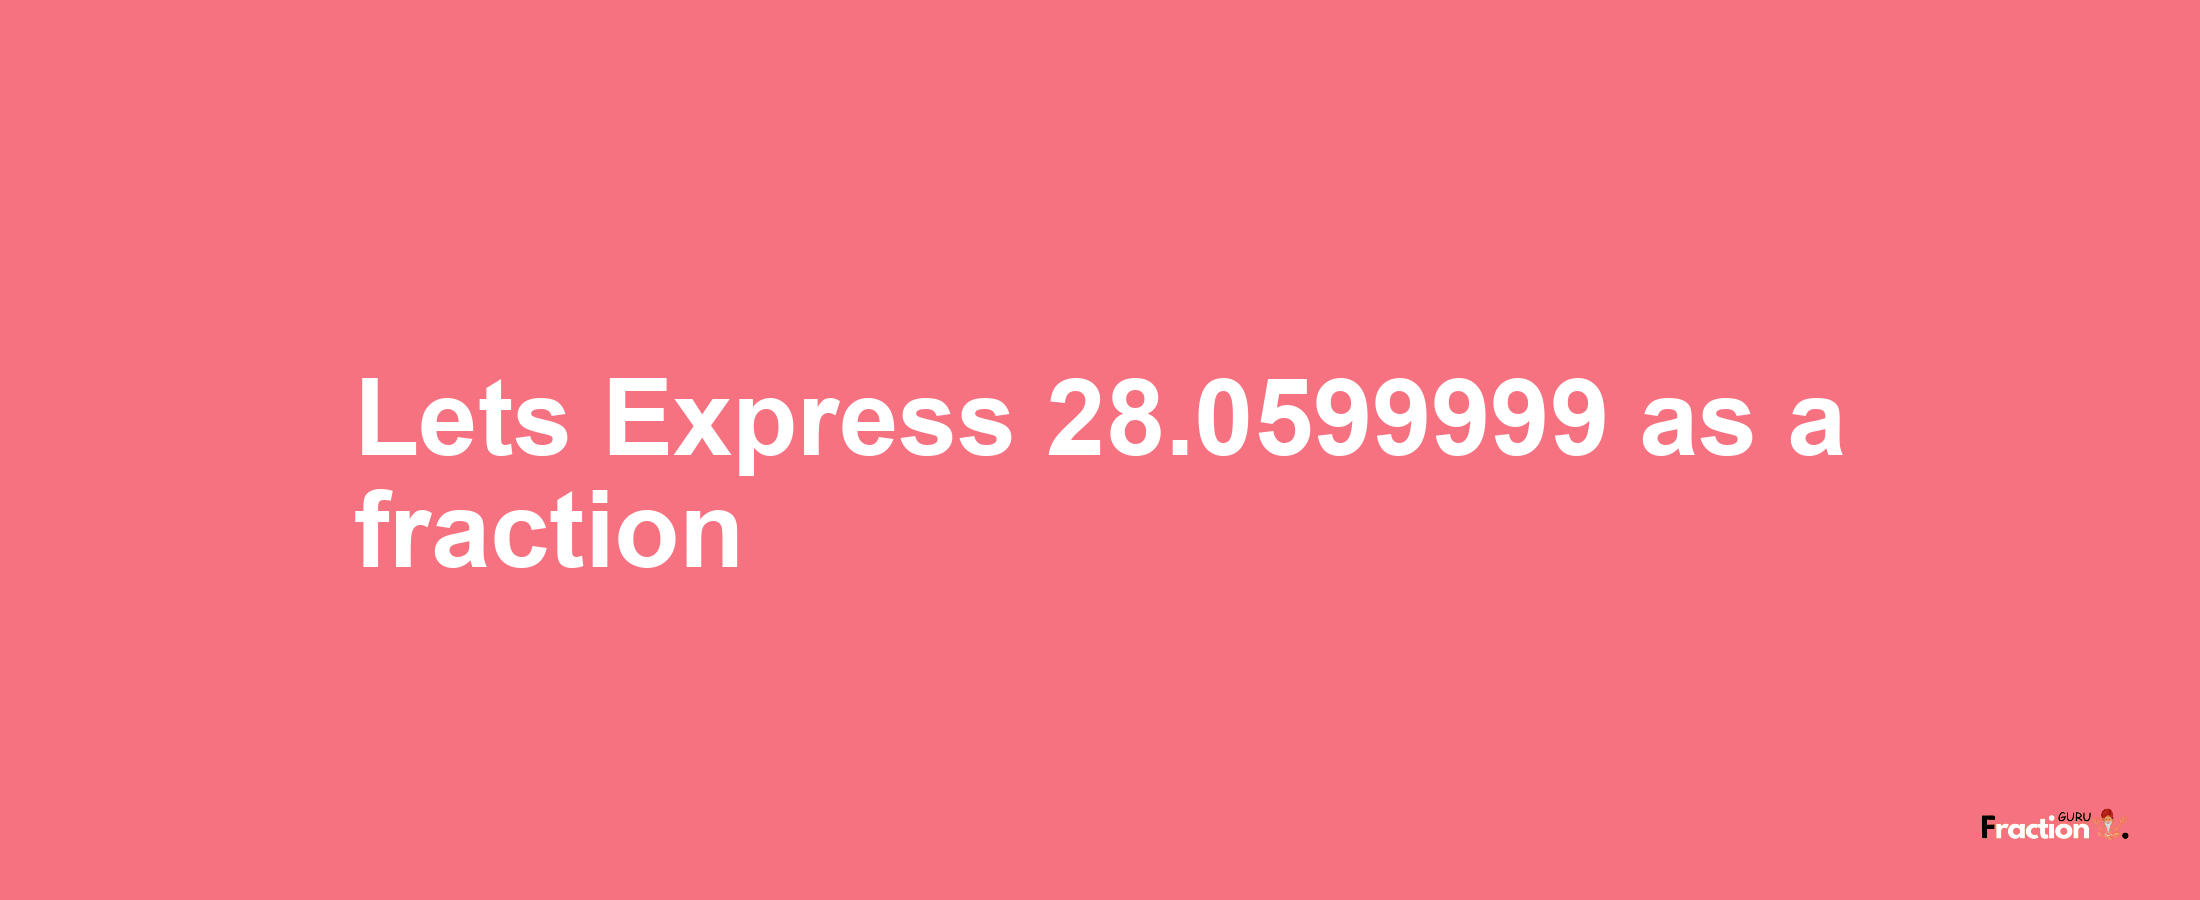 Lets Express 28.0599999 as afraction